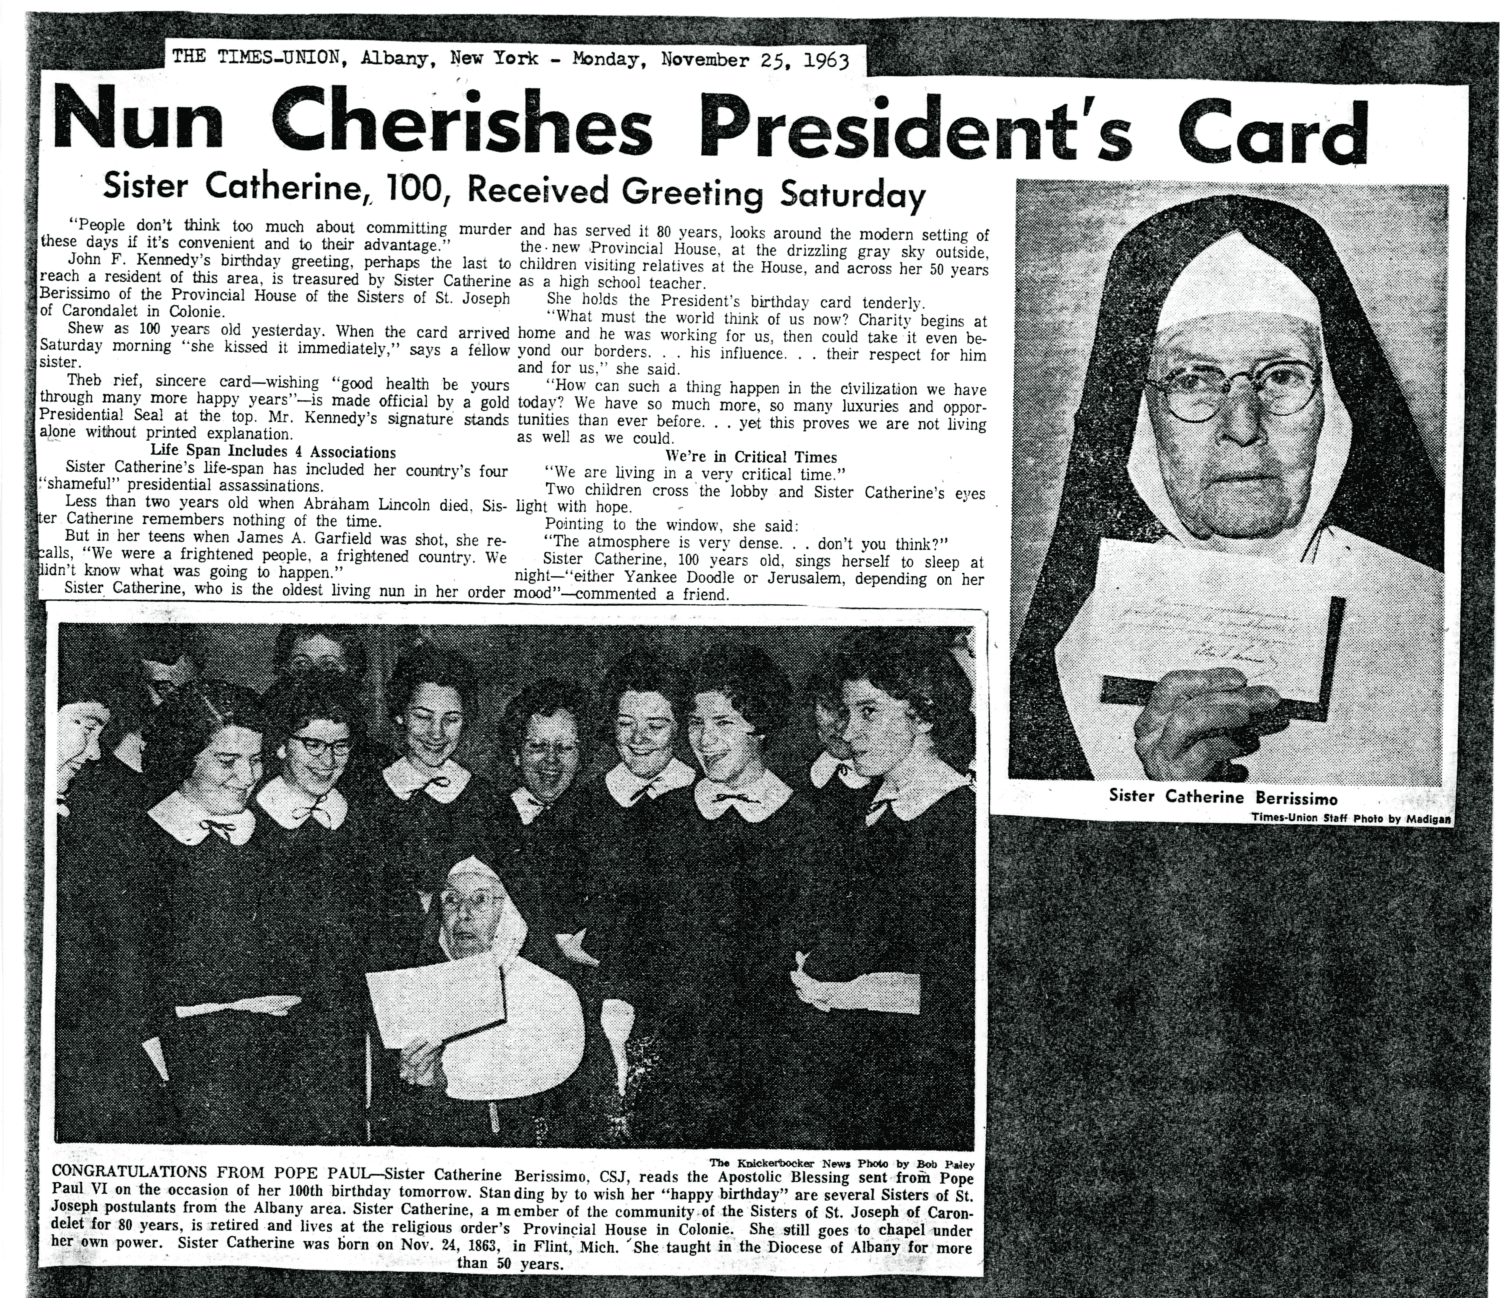 A newspaper clipping with the headline "Nun Cherishes President's Card"